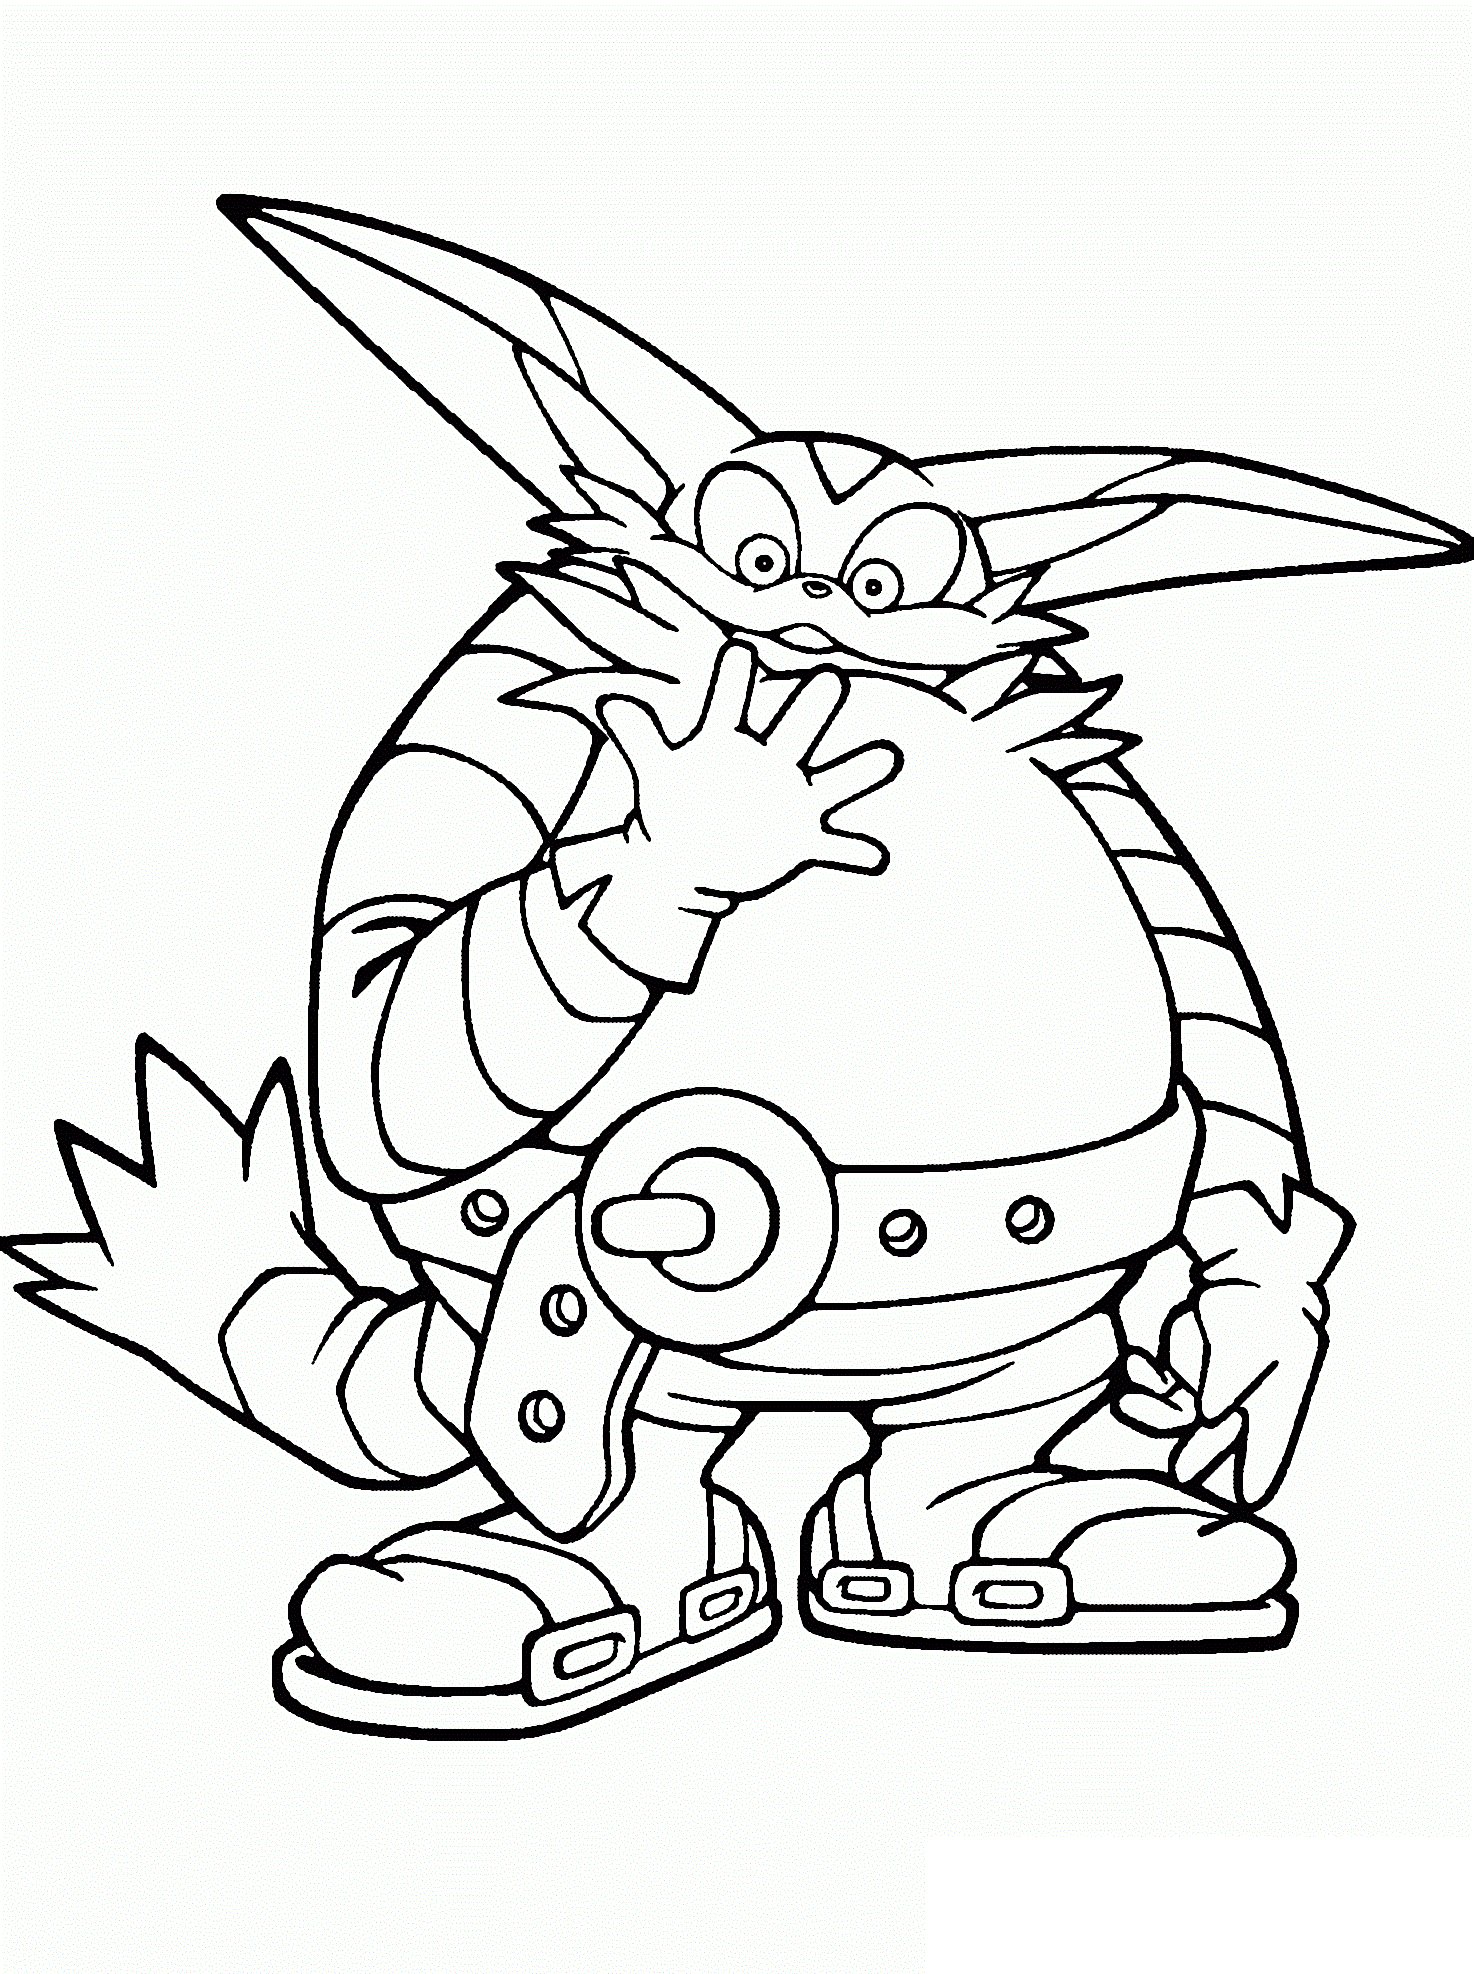 Big The Cat Coloring Page